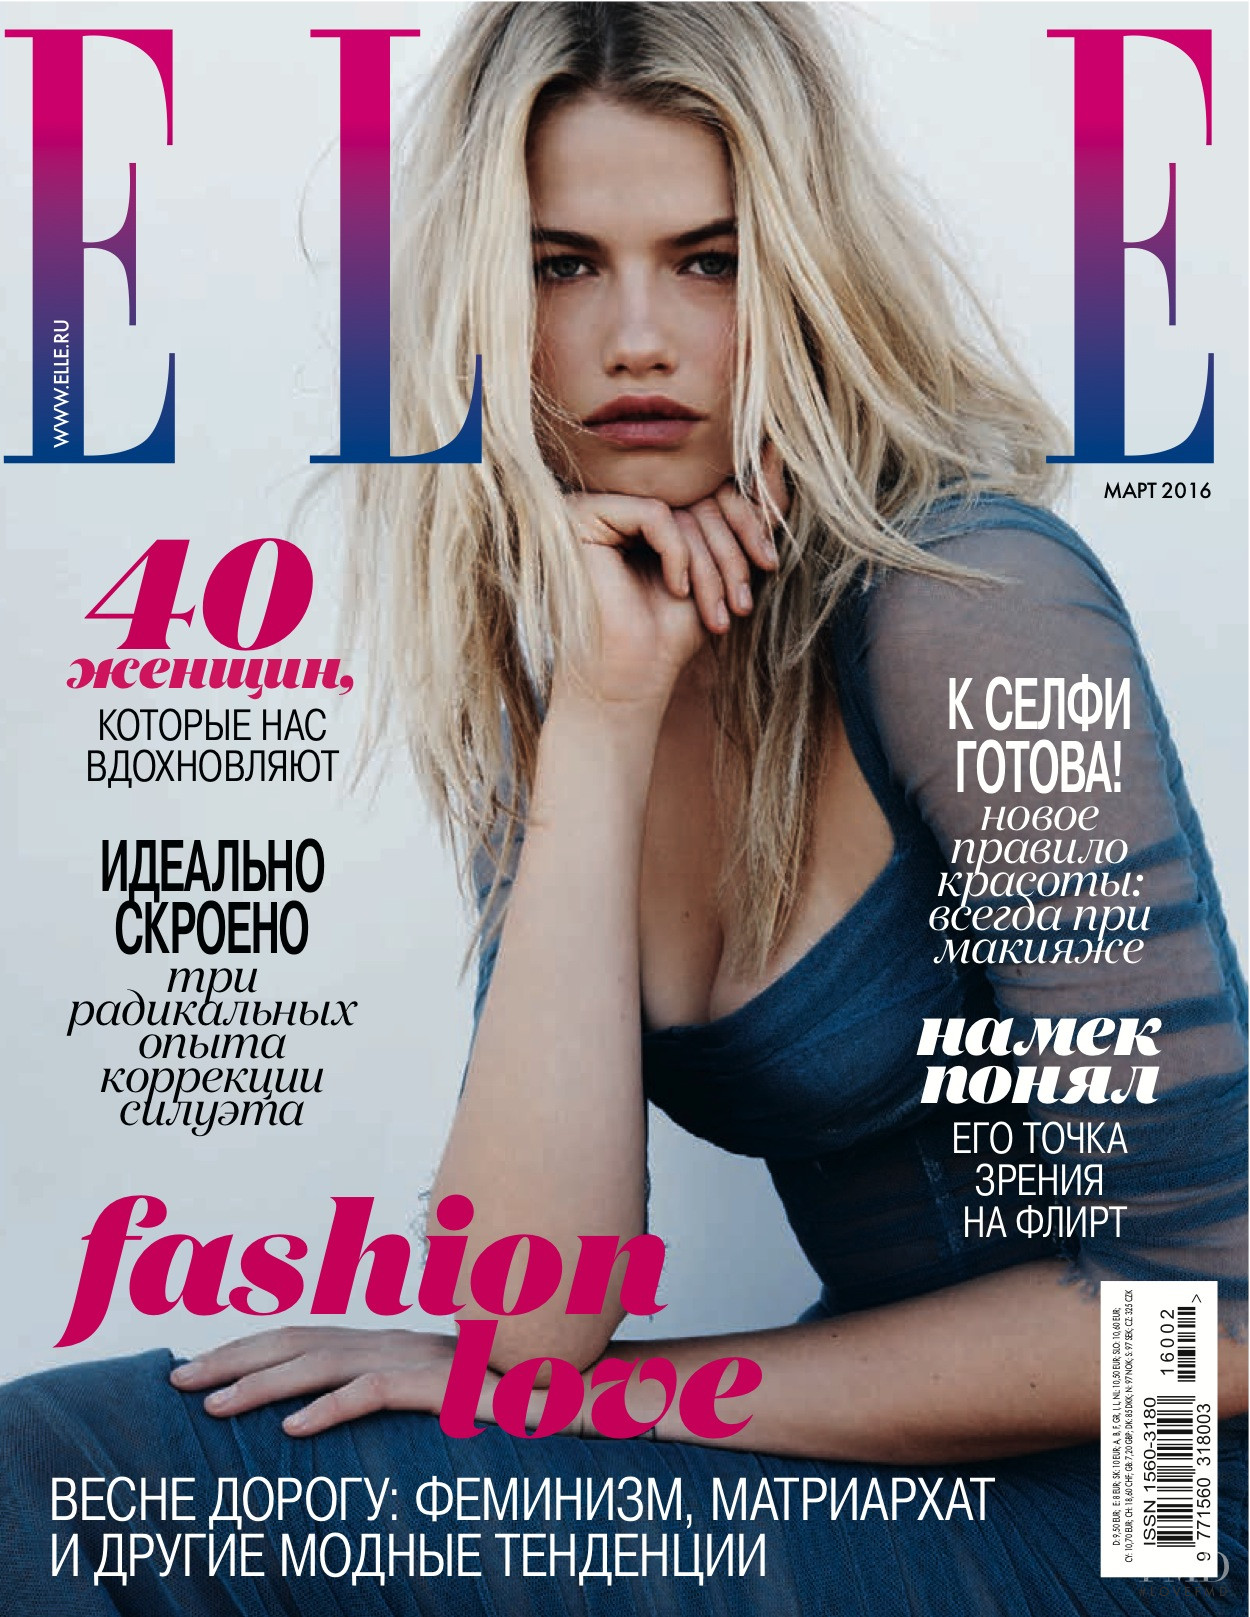 Cover of Elle Russia with Hailey Clauson, March 2016 (ID:47315 ...